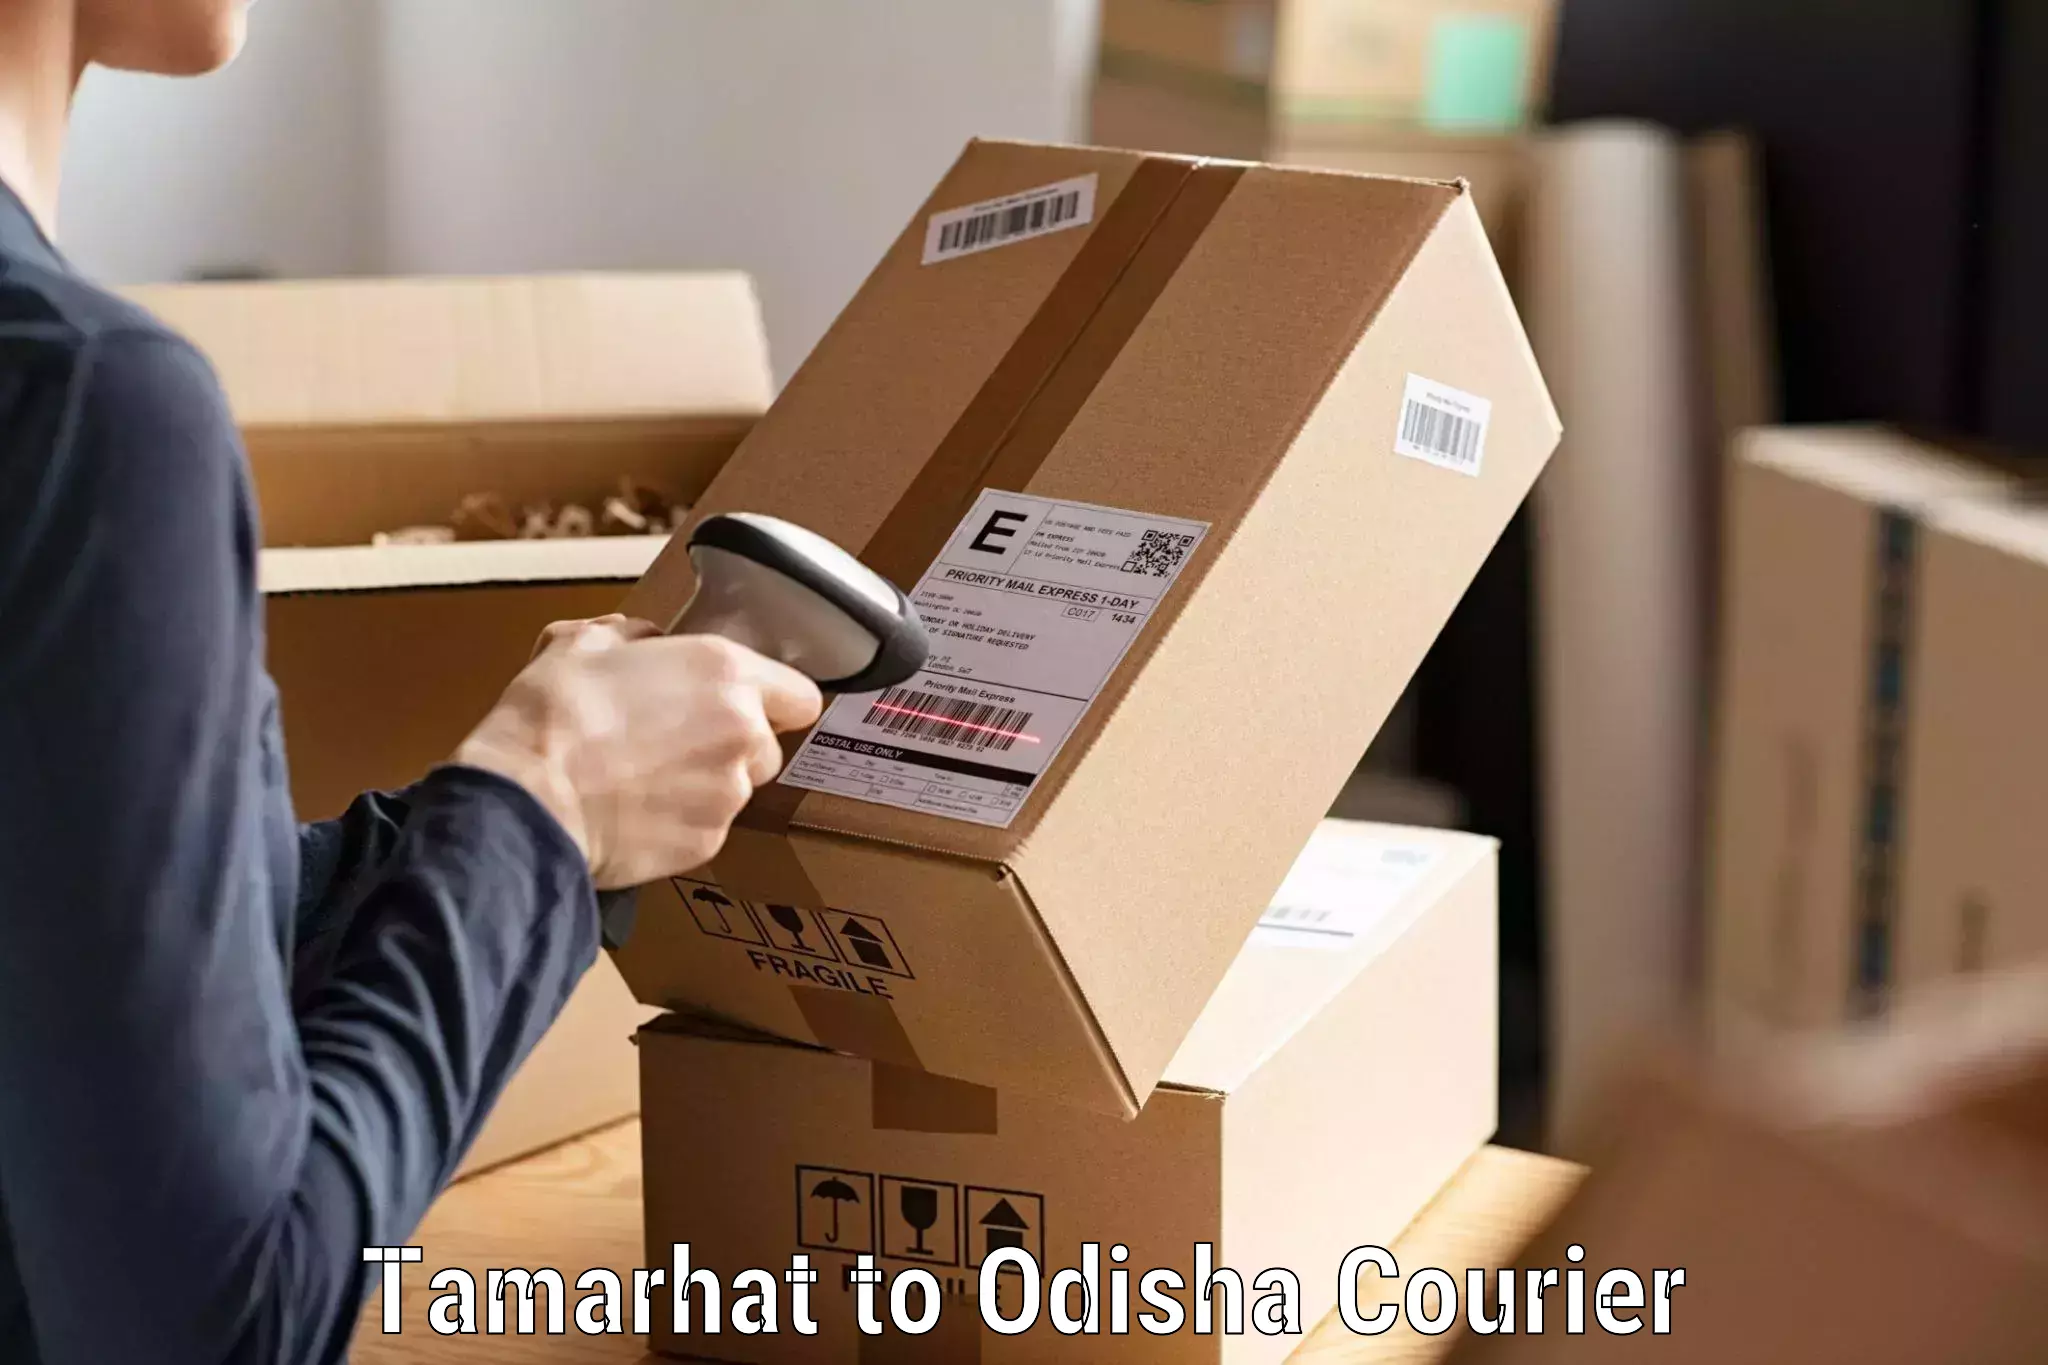 Courier service efficiency in Tamarhat to Paradip Port